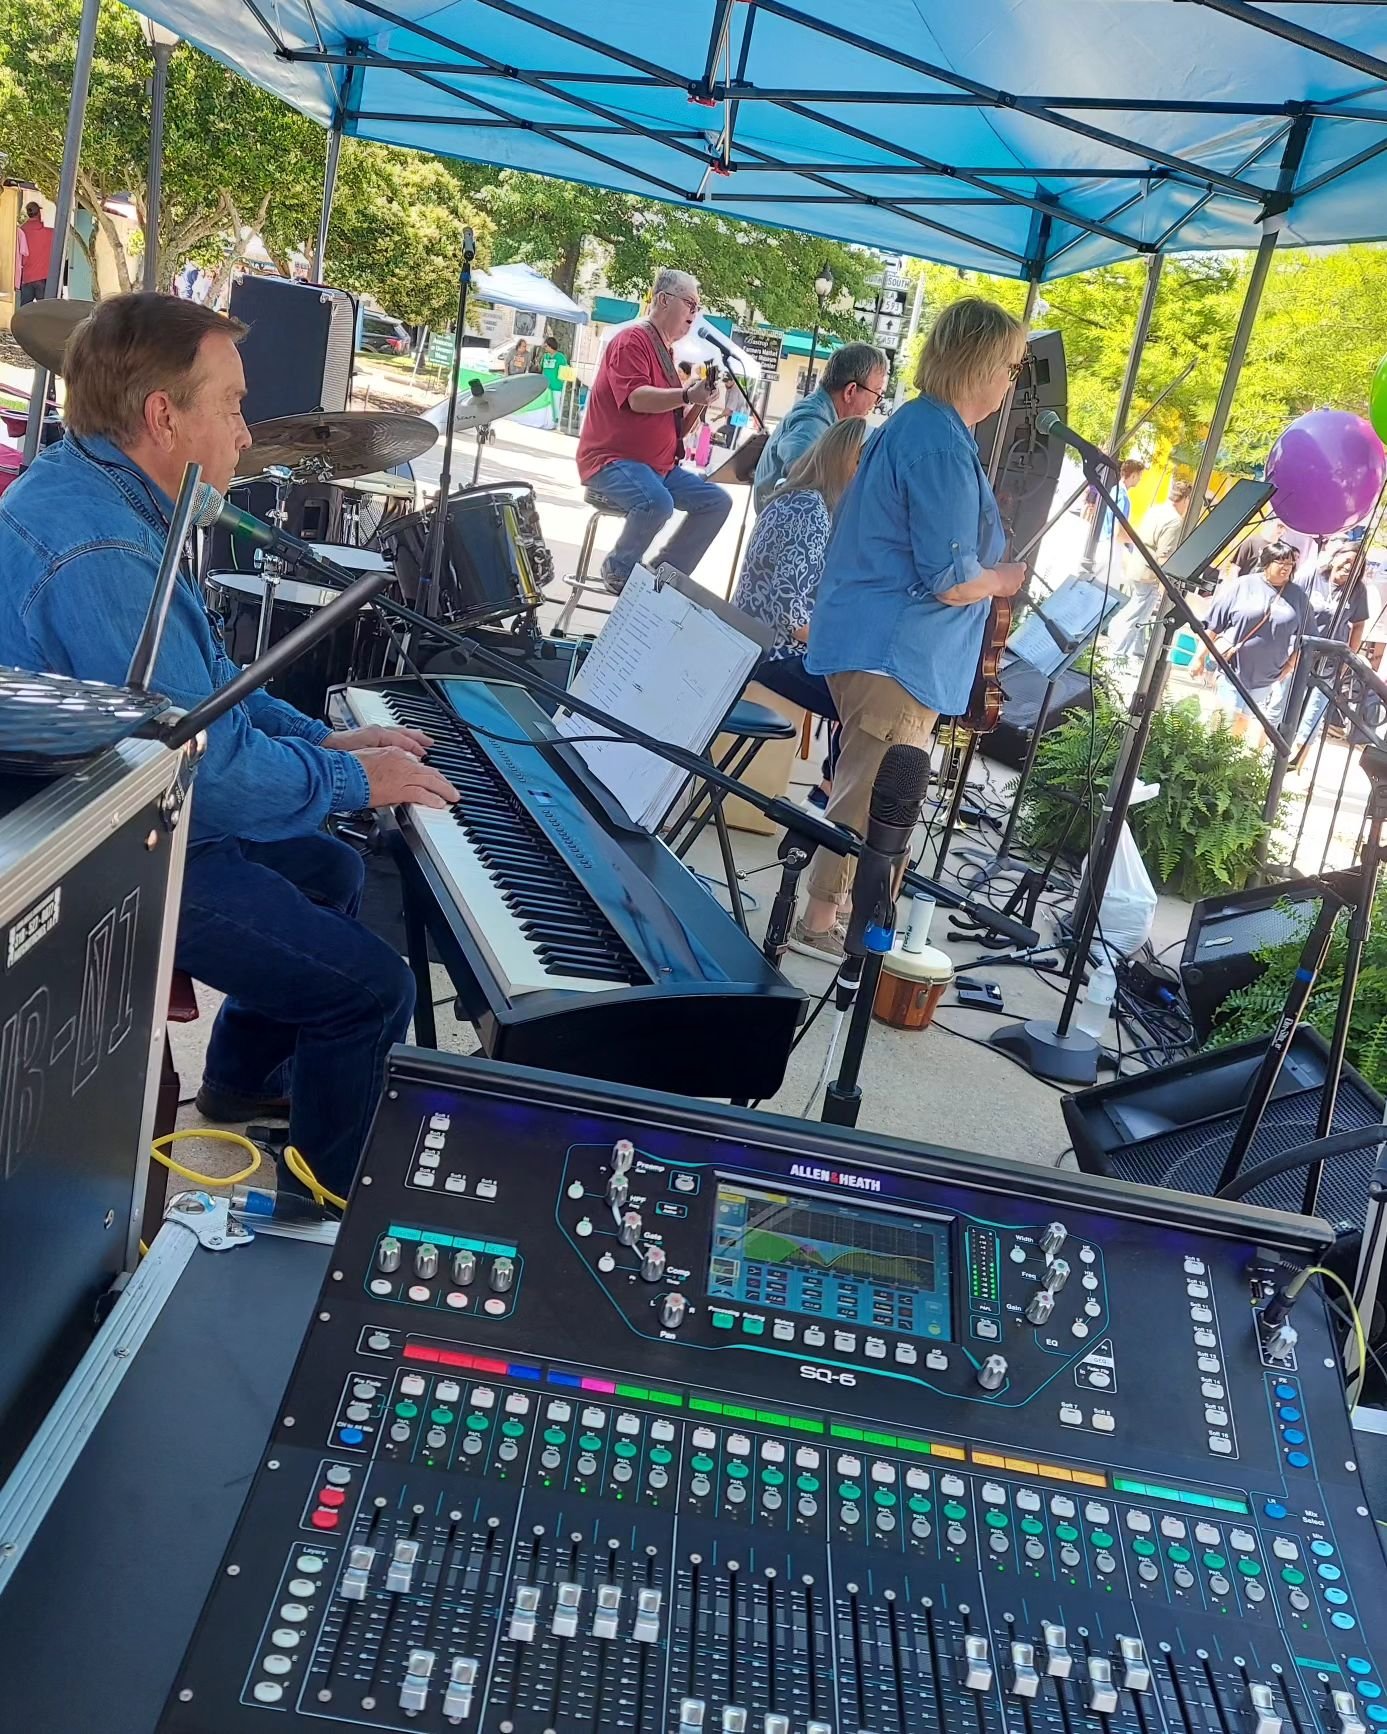 Enjoying all of the awesome live music at the main stage at the May Madness Street Festival featuring Homegrown and 31GR8! Coming up next will be the Hawkins Family! 
.
.
#soundlightscamerayou #livesoundengineer #sq6 #allenandheath #jblvrx #jbl #fest